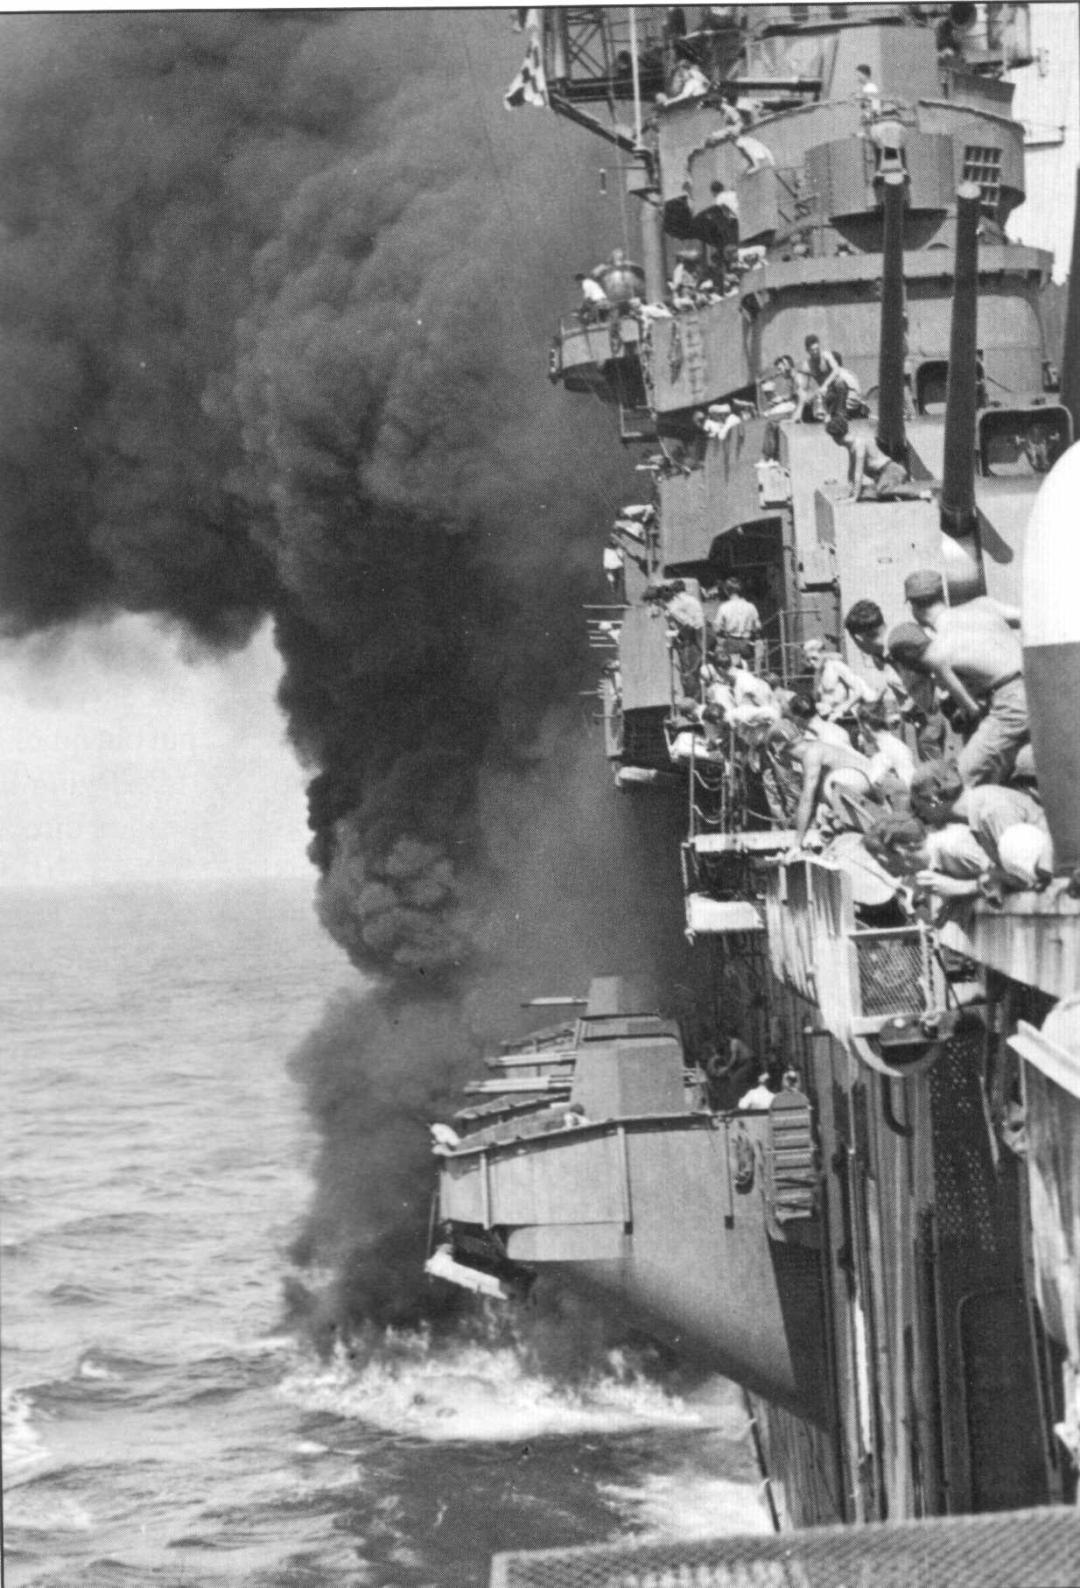 View of the USS Yorktown (CV-10) when it was hit by Japanese bomb at 1507, 18 March 1945 off Okinawa